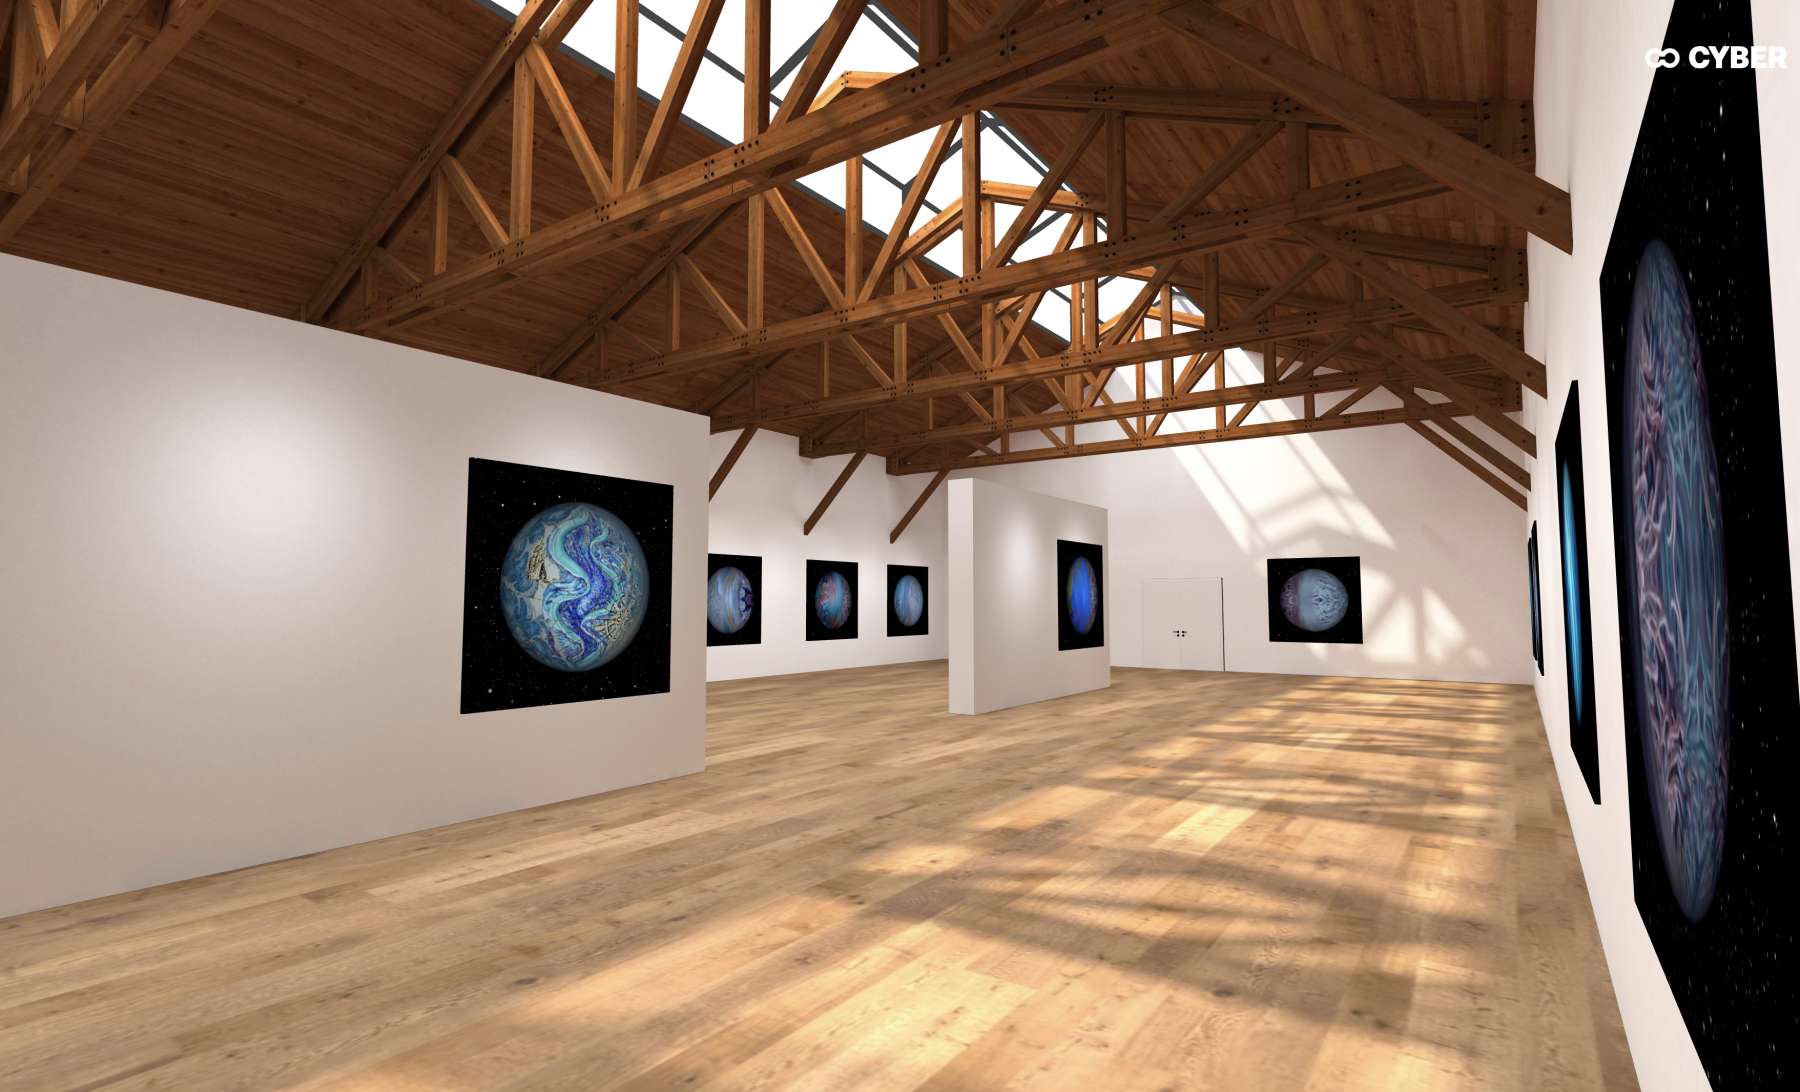 Metaverse OnCyber Gallery space featuring NFTs by Nikolina Kovalenko.